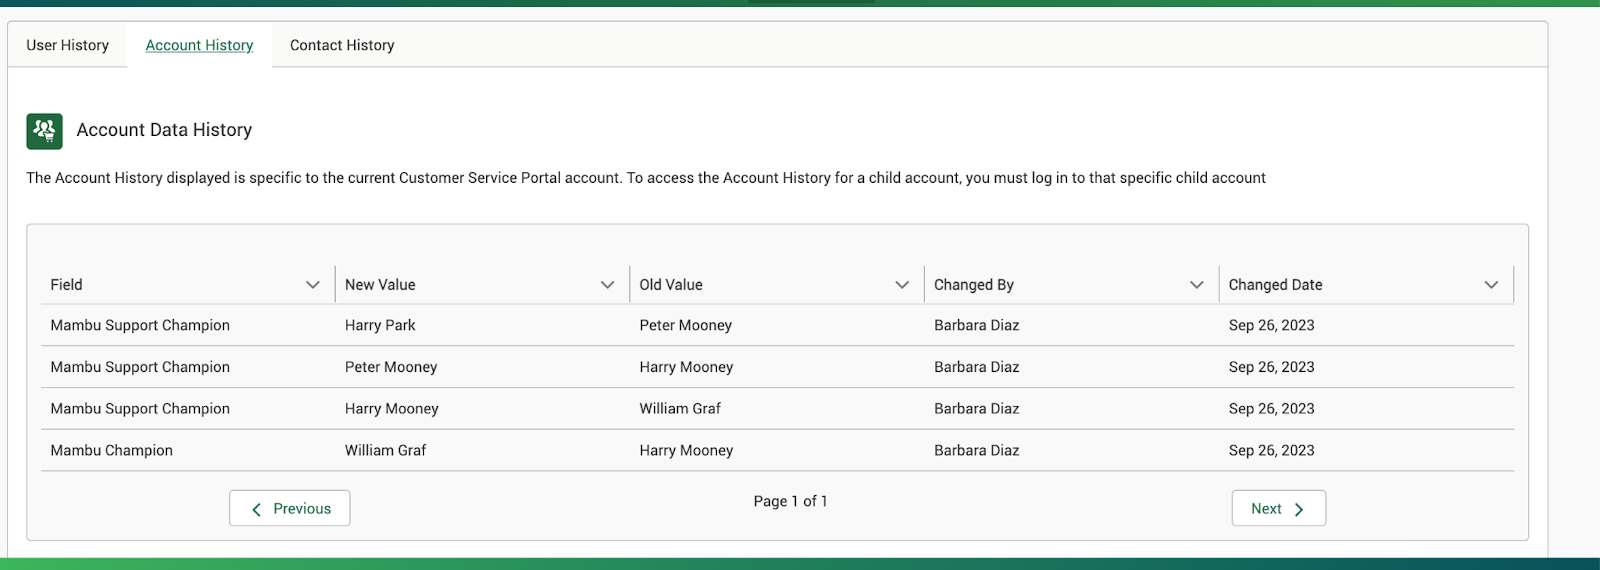 Accessing Account History in the Client Service portal